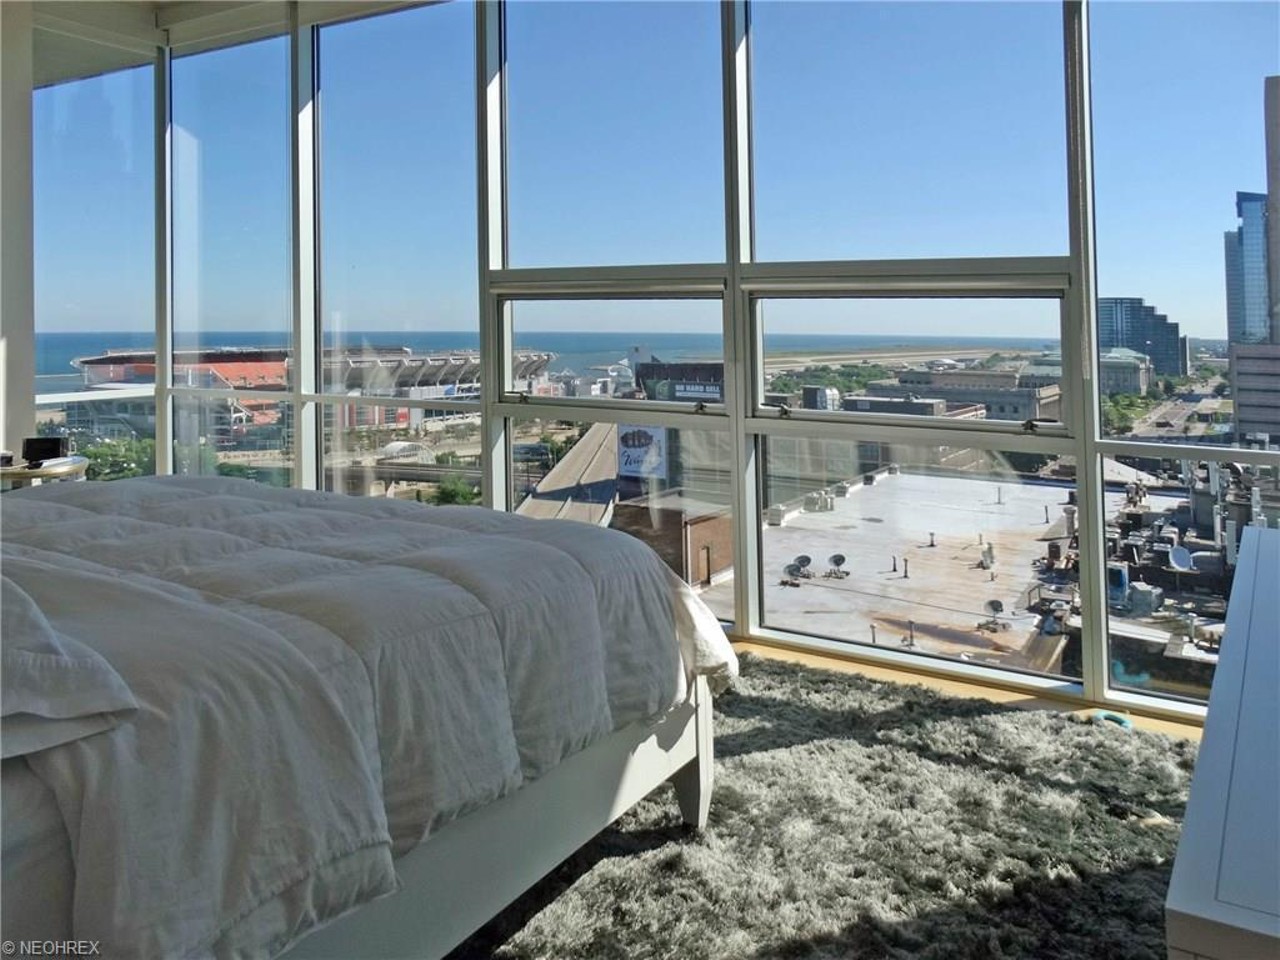 The Condo One: 701 W. Lakeside Ave #1301, Cleveland
$1,550,000
This two-story corner penthouse includes spectacular views from the warehouse district downtown Cleveland. Sure, it&#146;s not quite a house unto itself, but with a view that miraculous, you may not care. 
Photos via Redfin